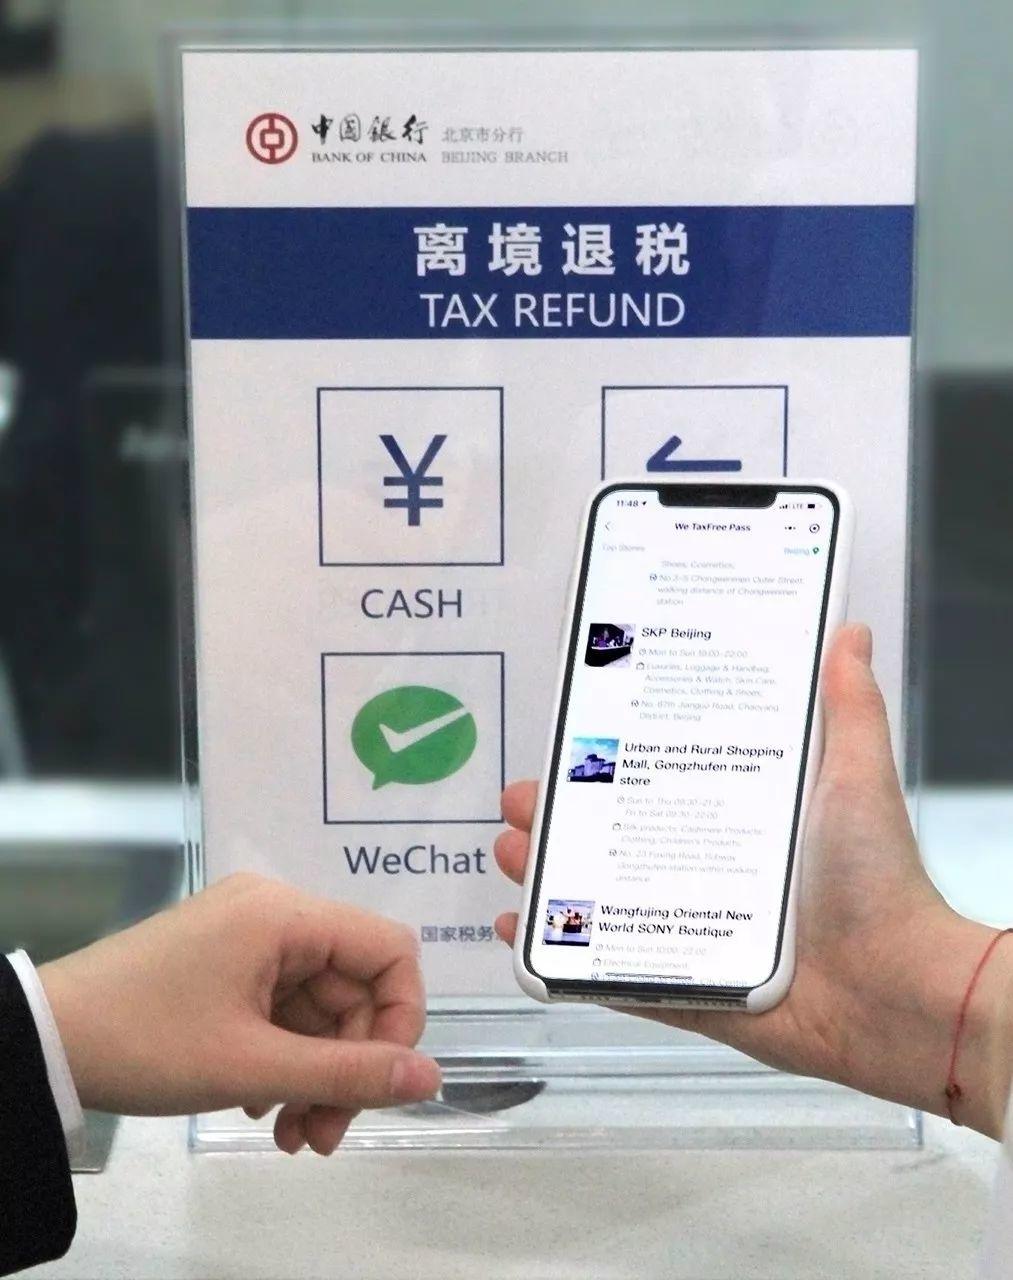 wechat's real-time tax refunds service! check the full guide!